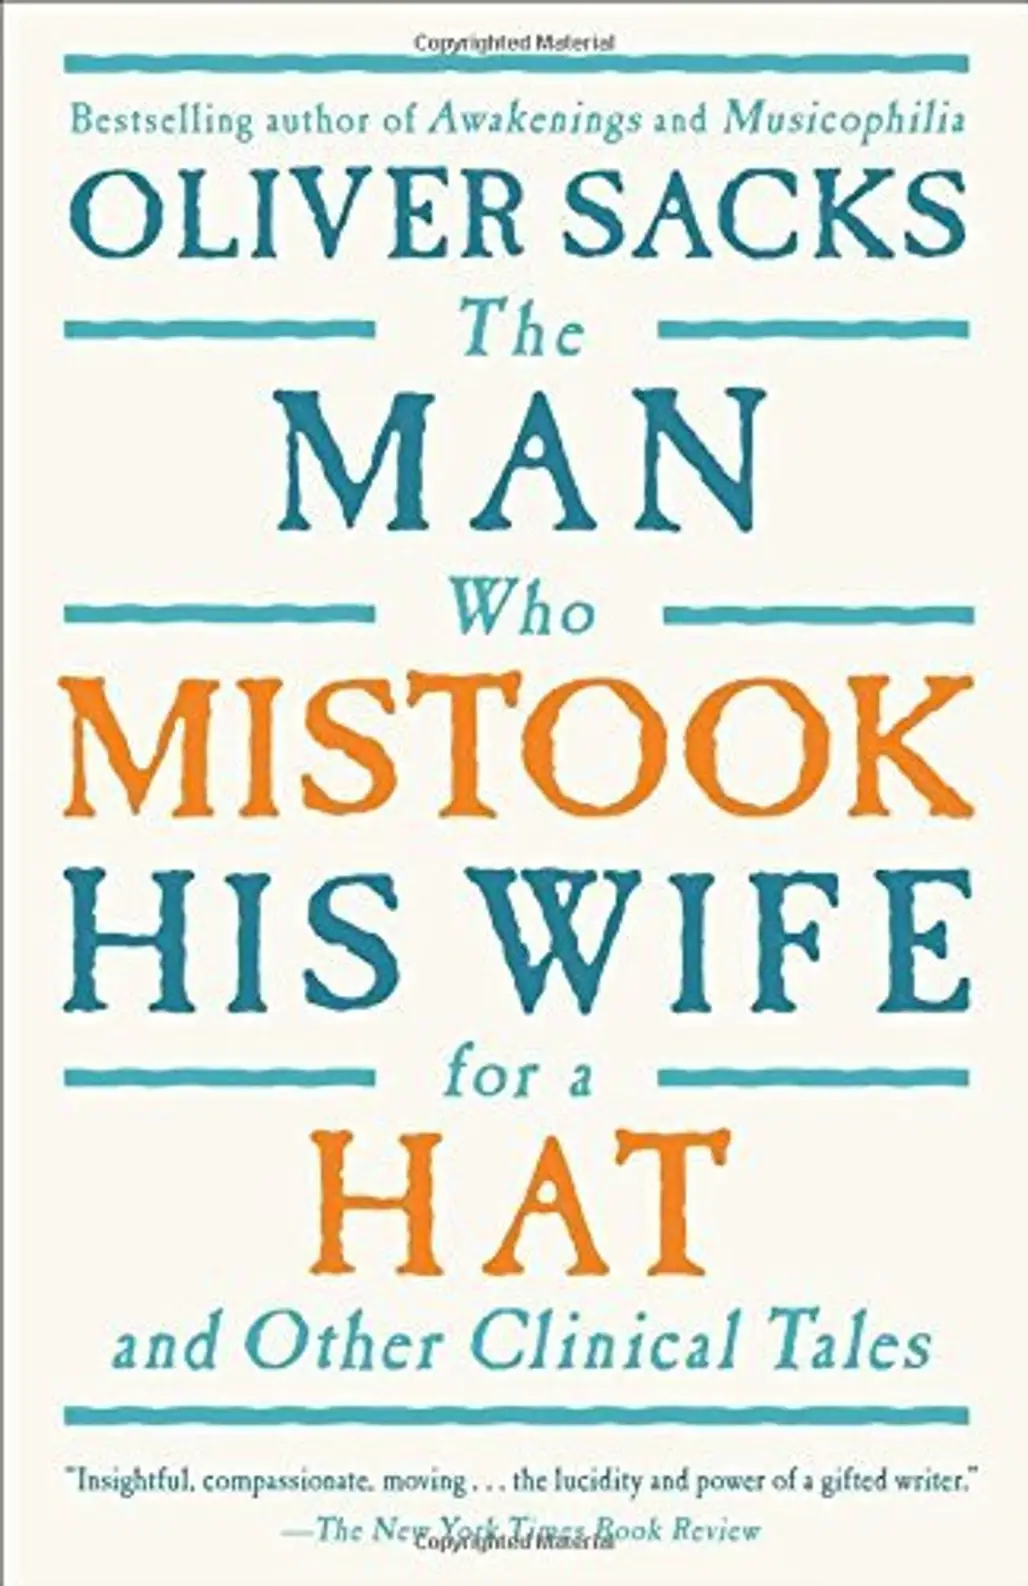 The Man Who Mistook His Wife for a Hat: and Other Clinical Tales by Oliver Sacks